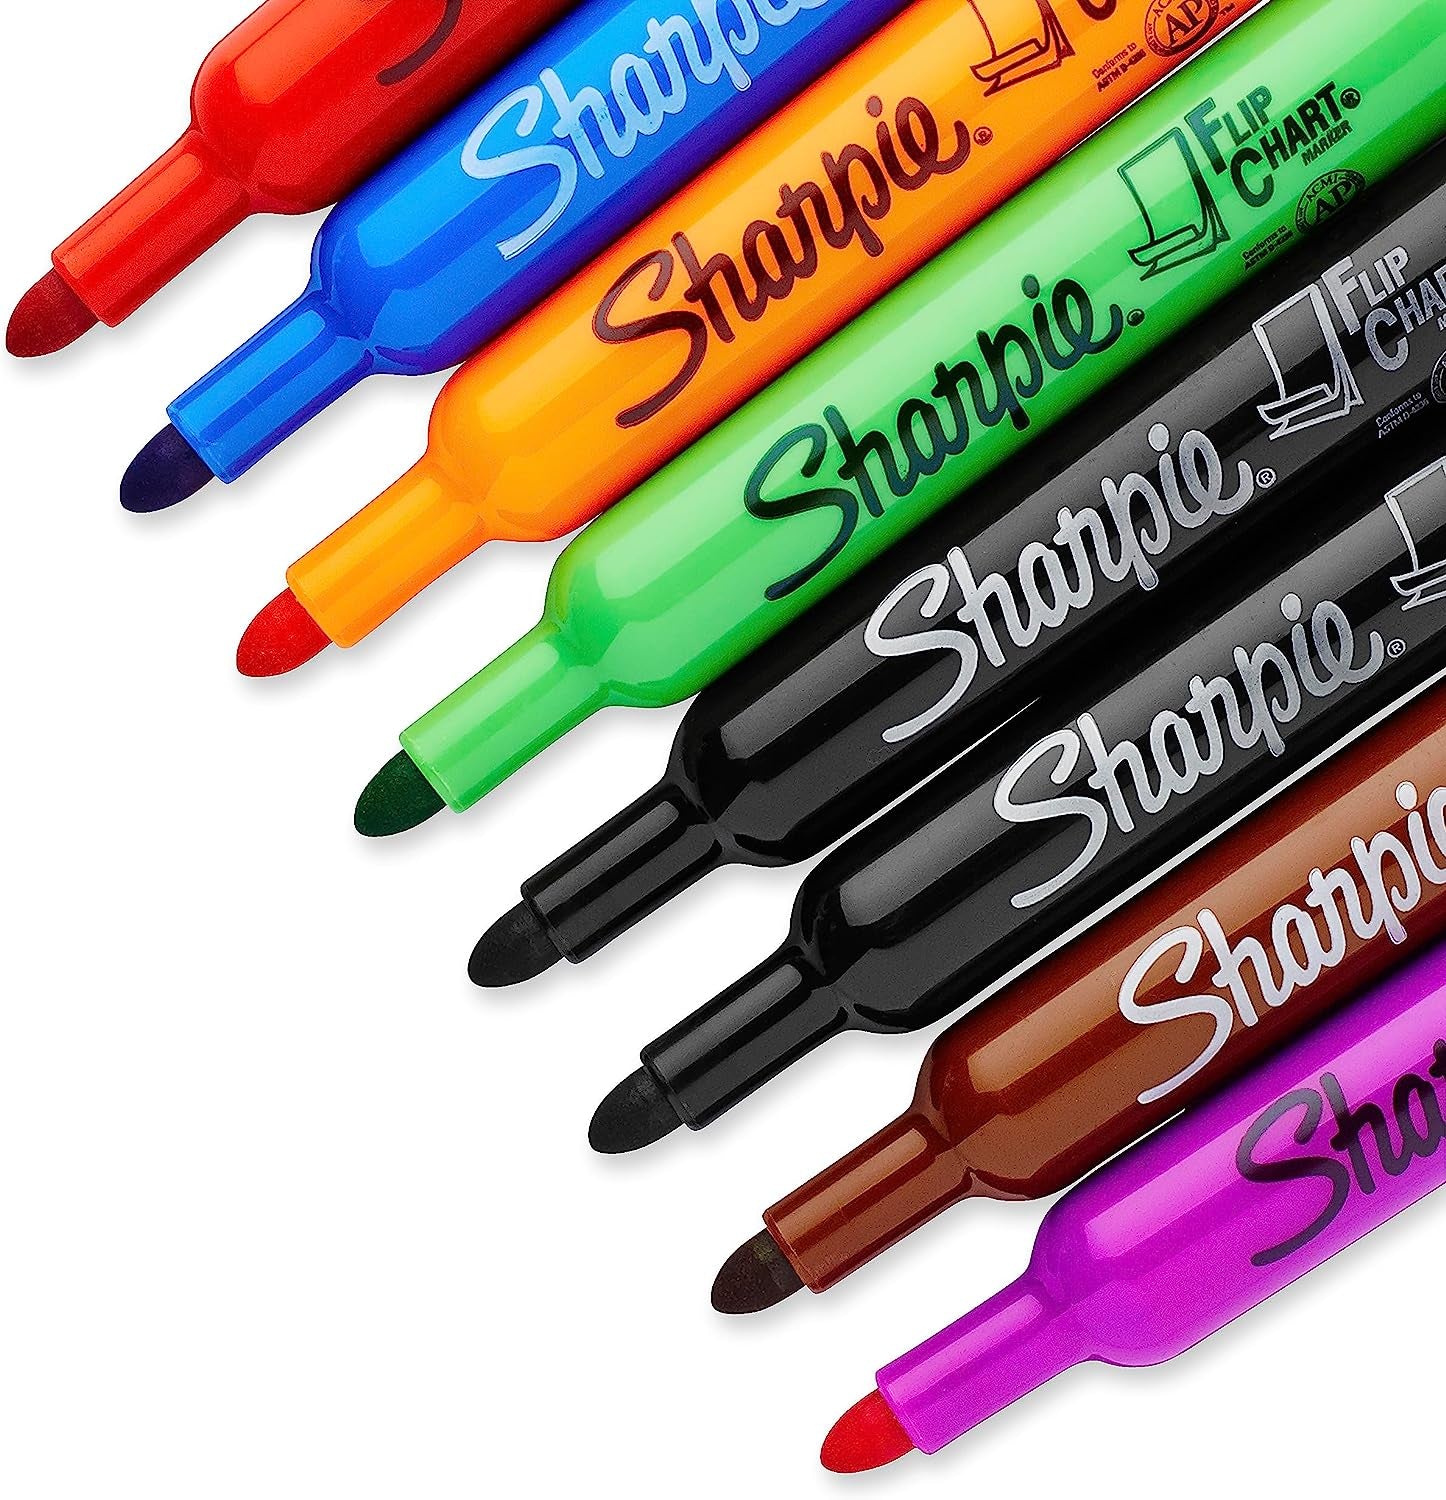 Flip Chart Markers, Bullet Tip, Assorted Colors, 8 Pack